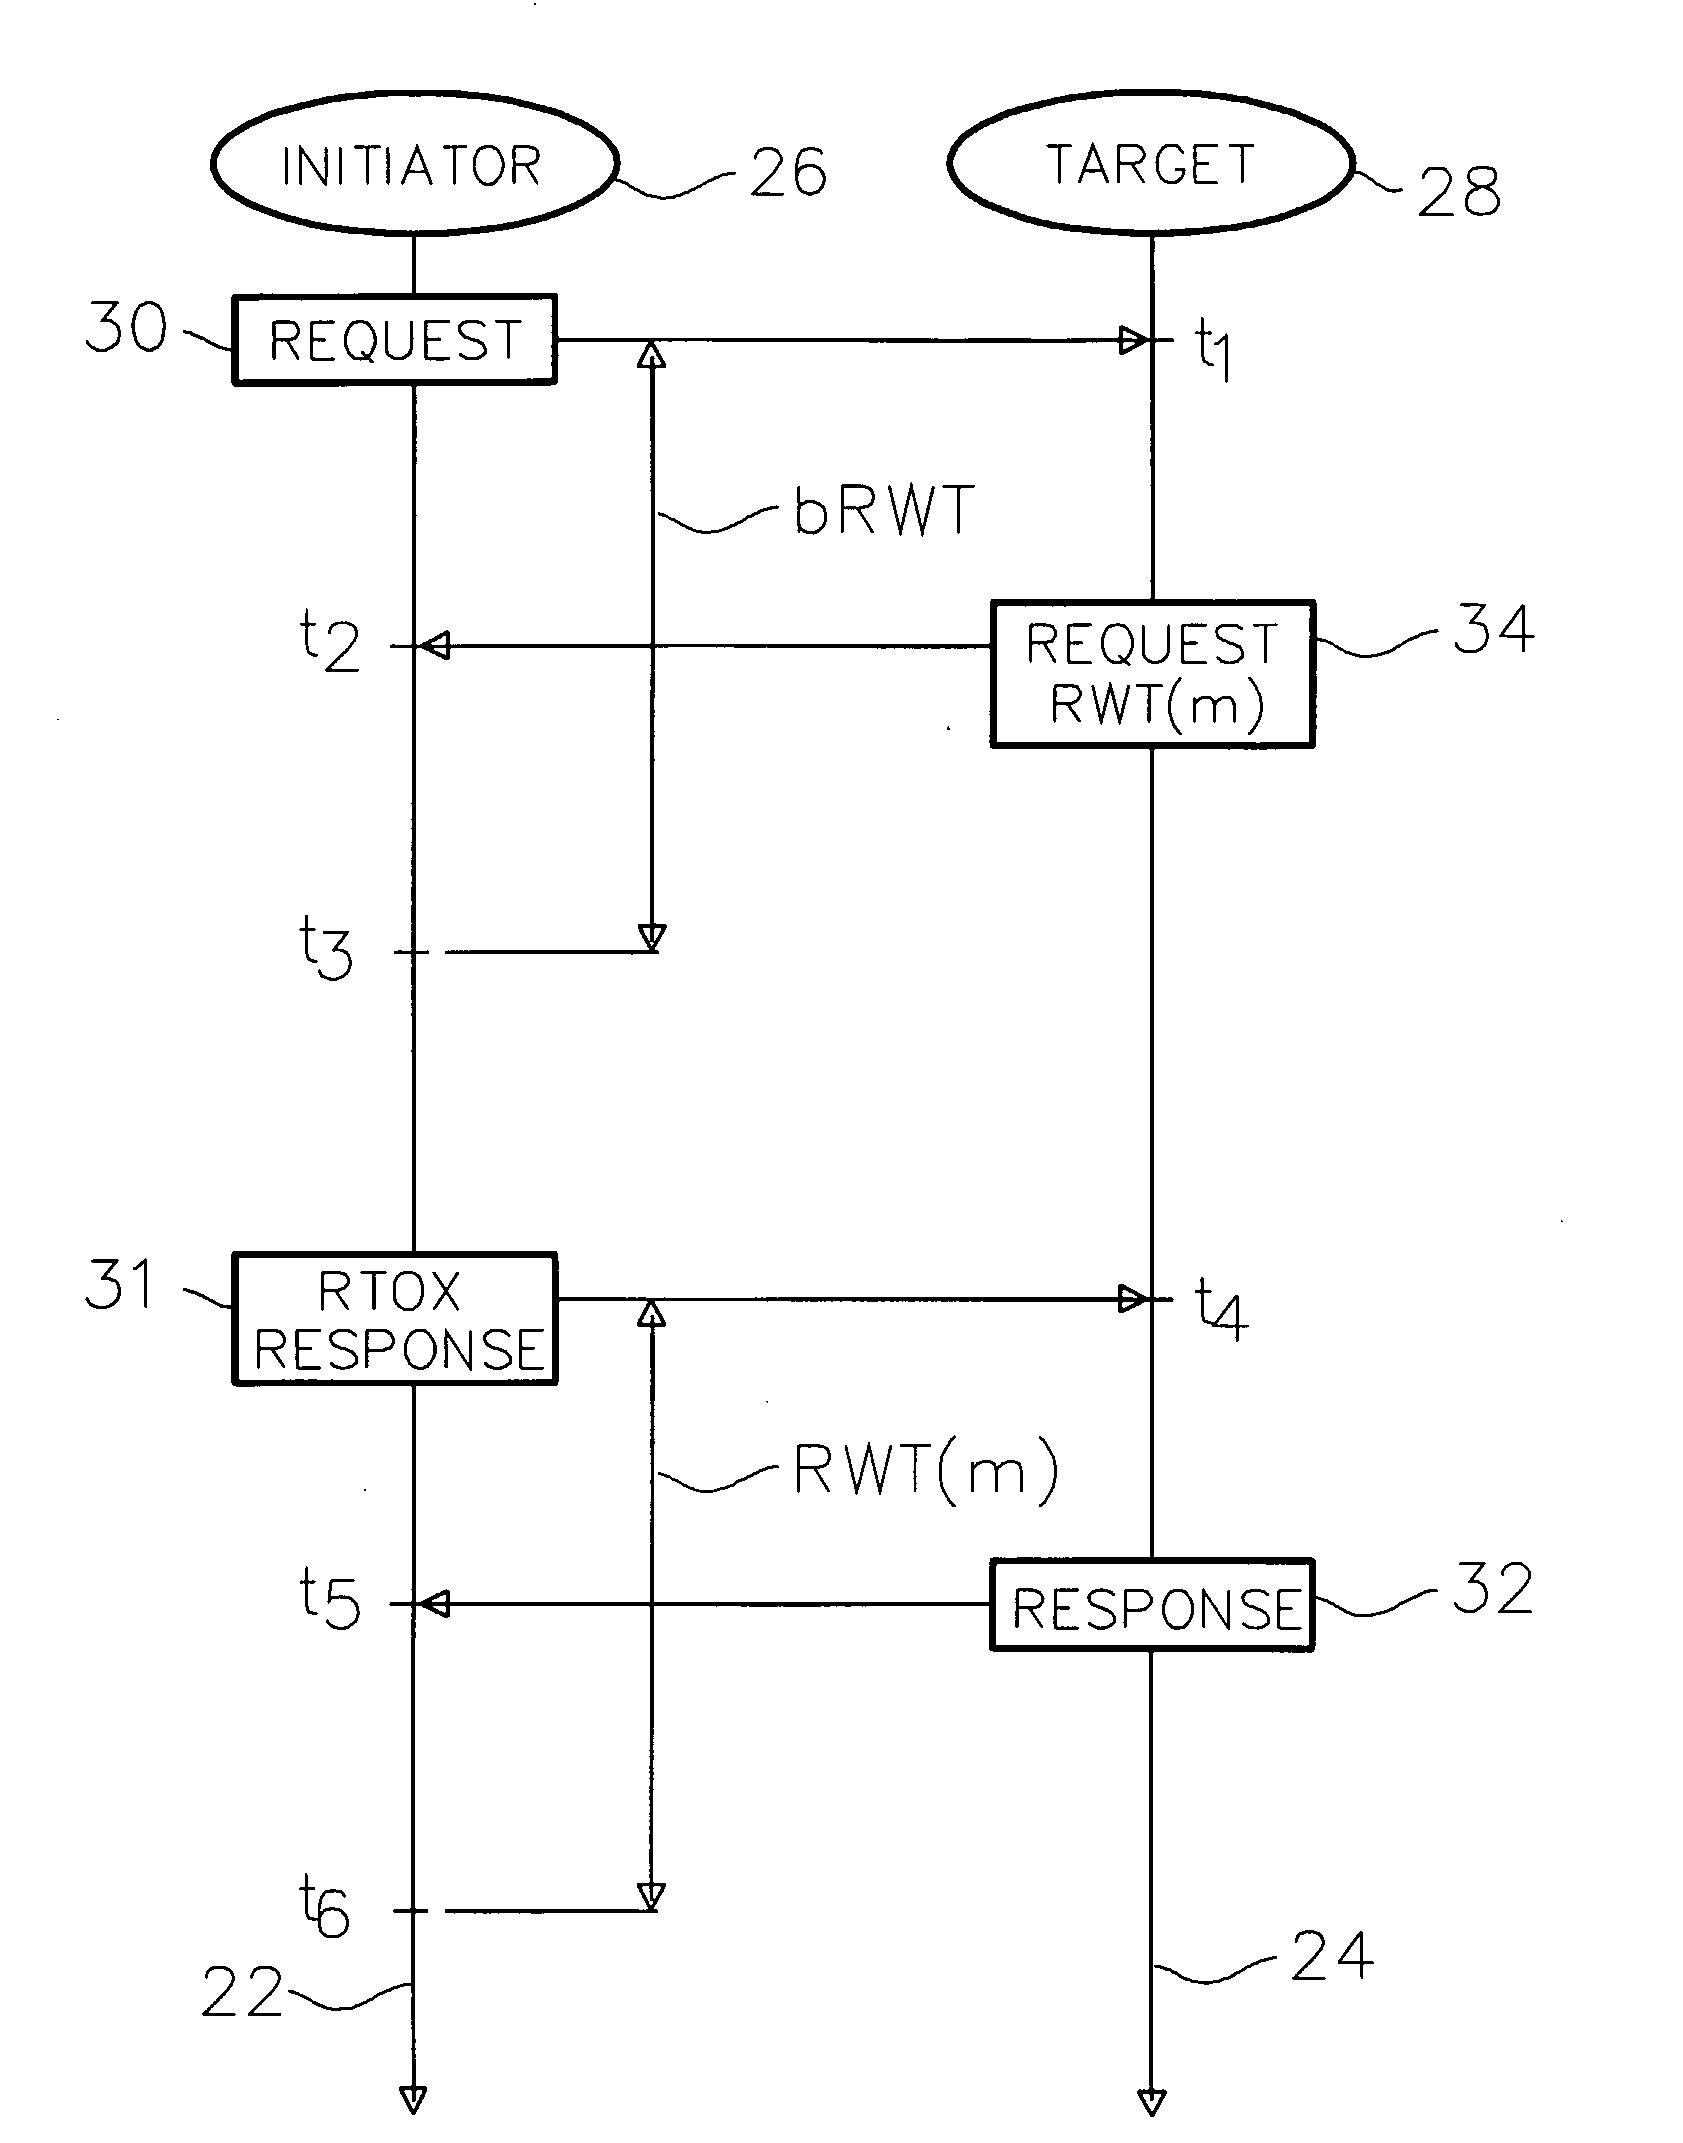 Method and Device for Fast Near-Field Communication